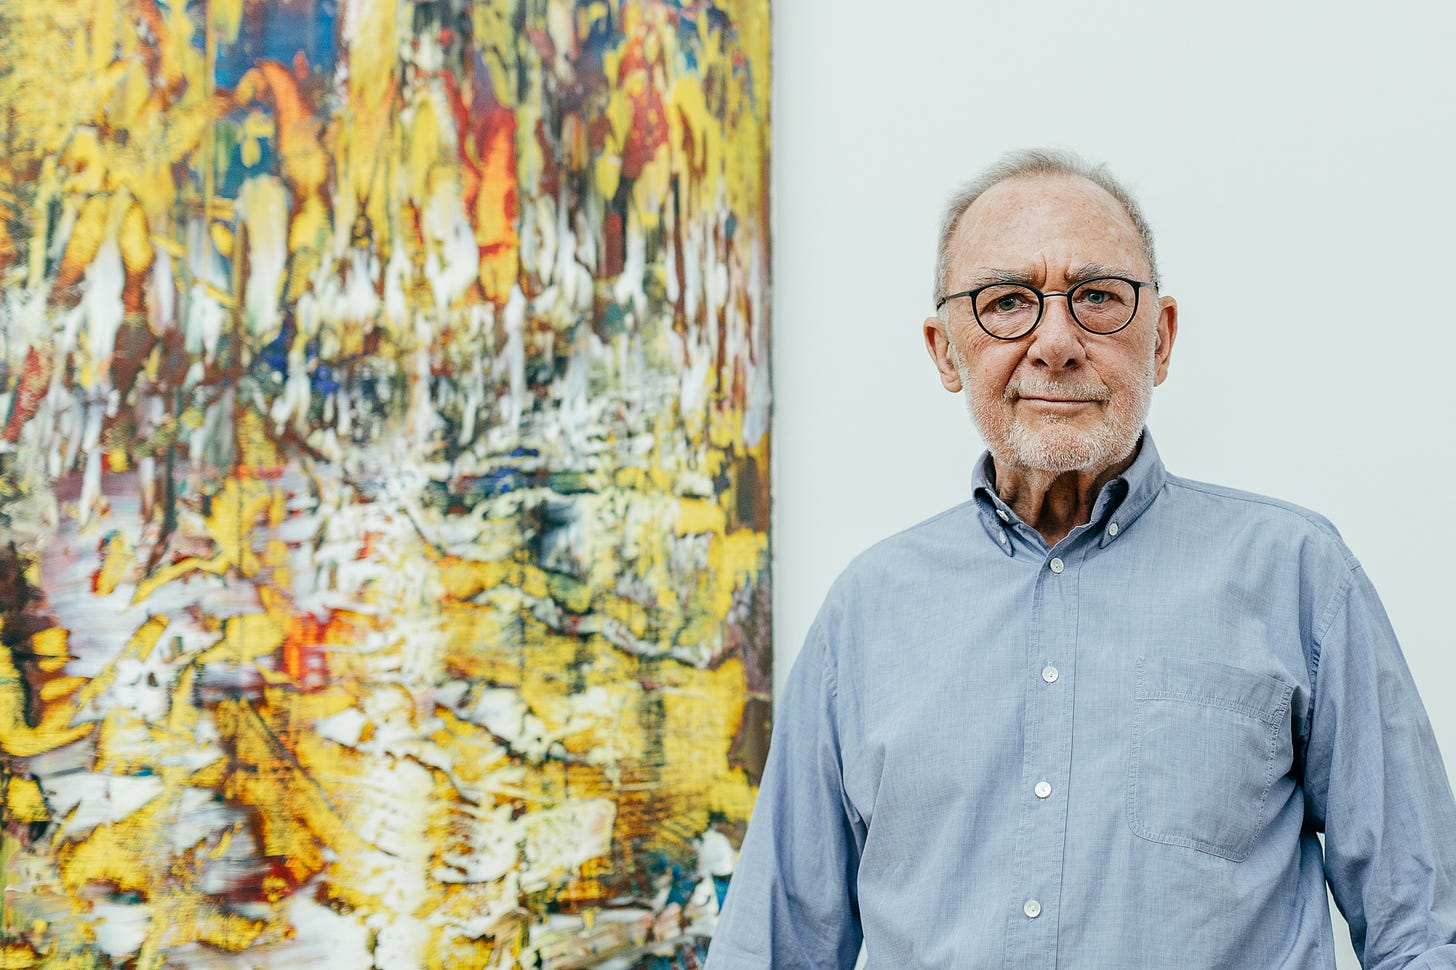 A portrait of Gerhard Richter in a blue shirt standing next to one of his paintings